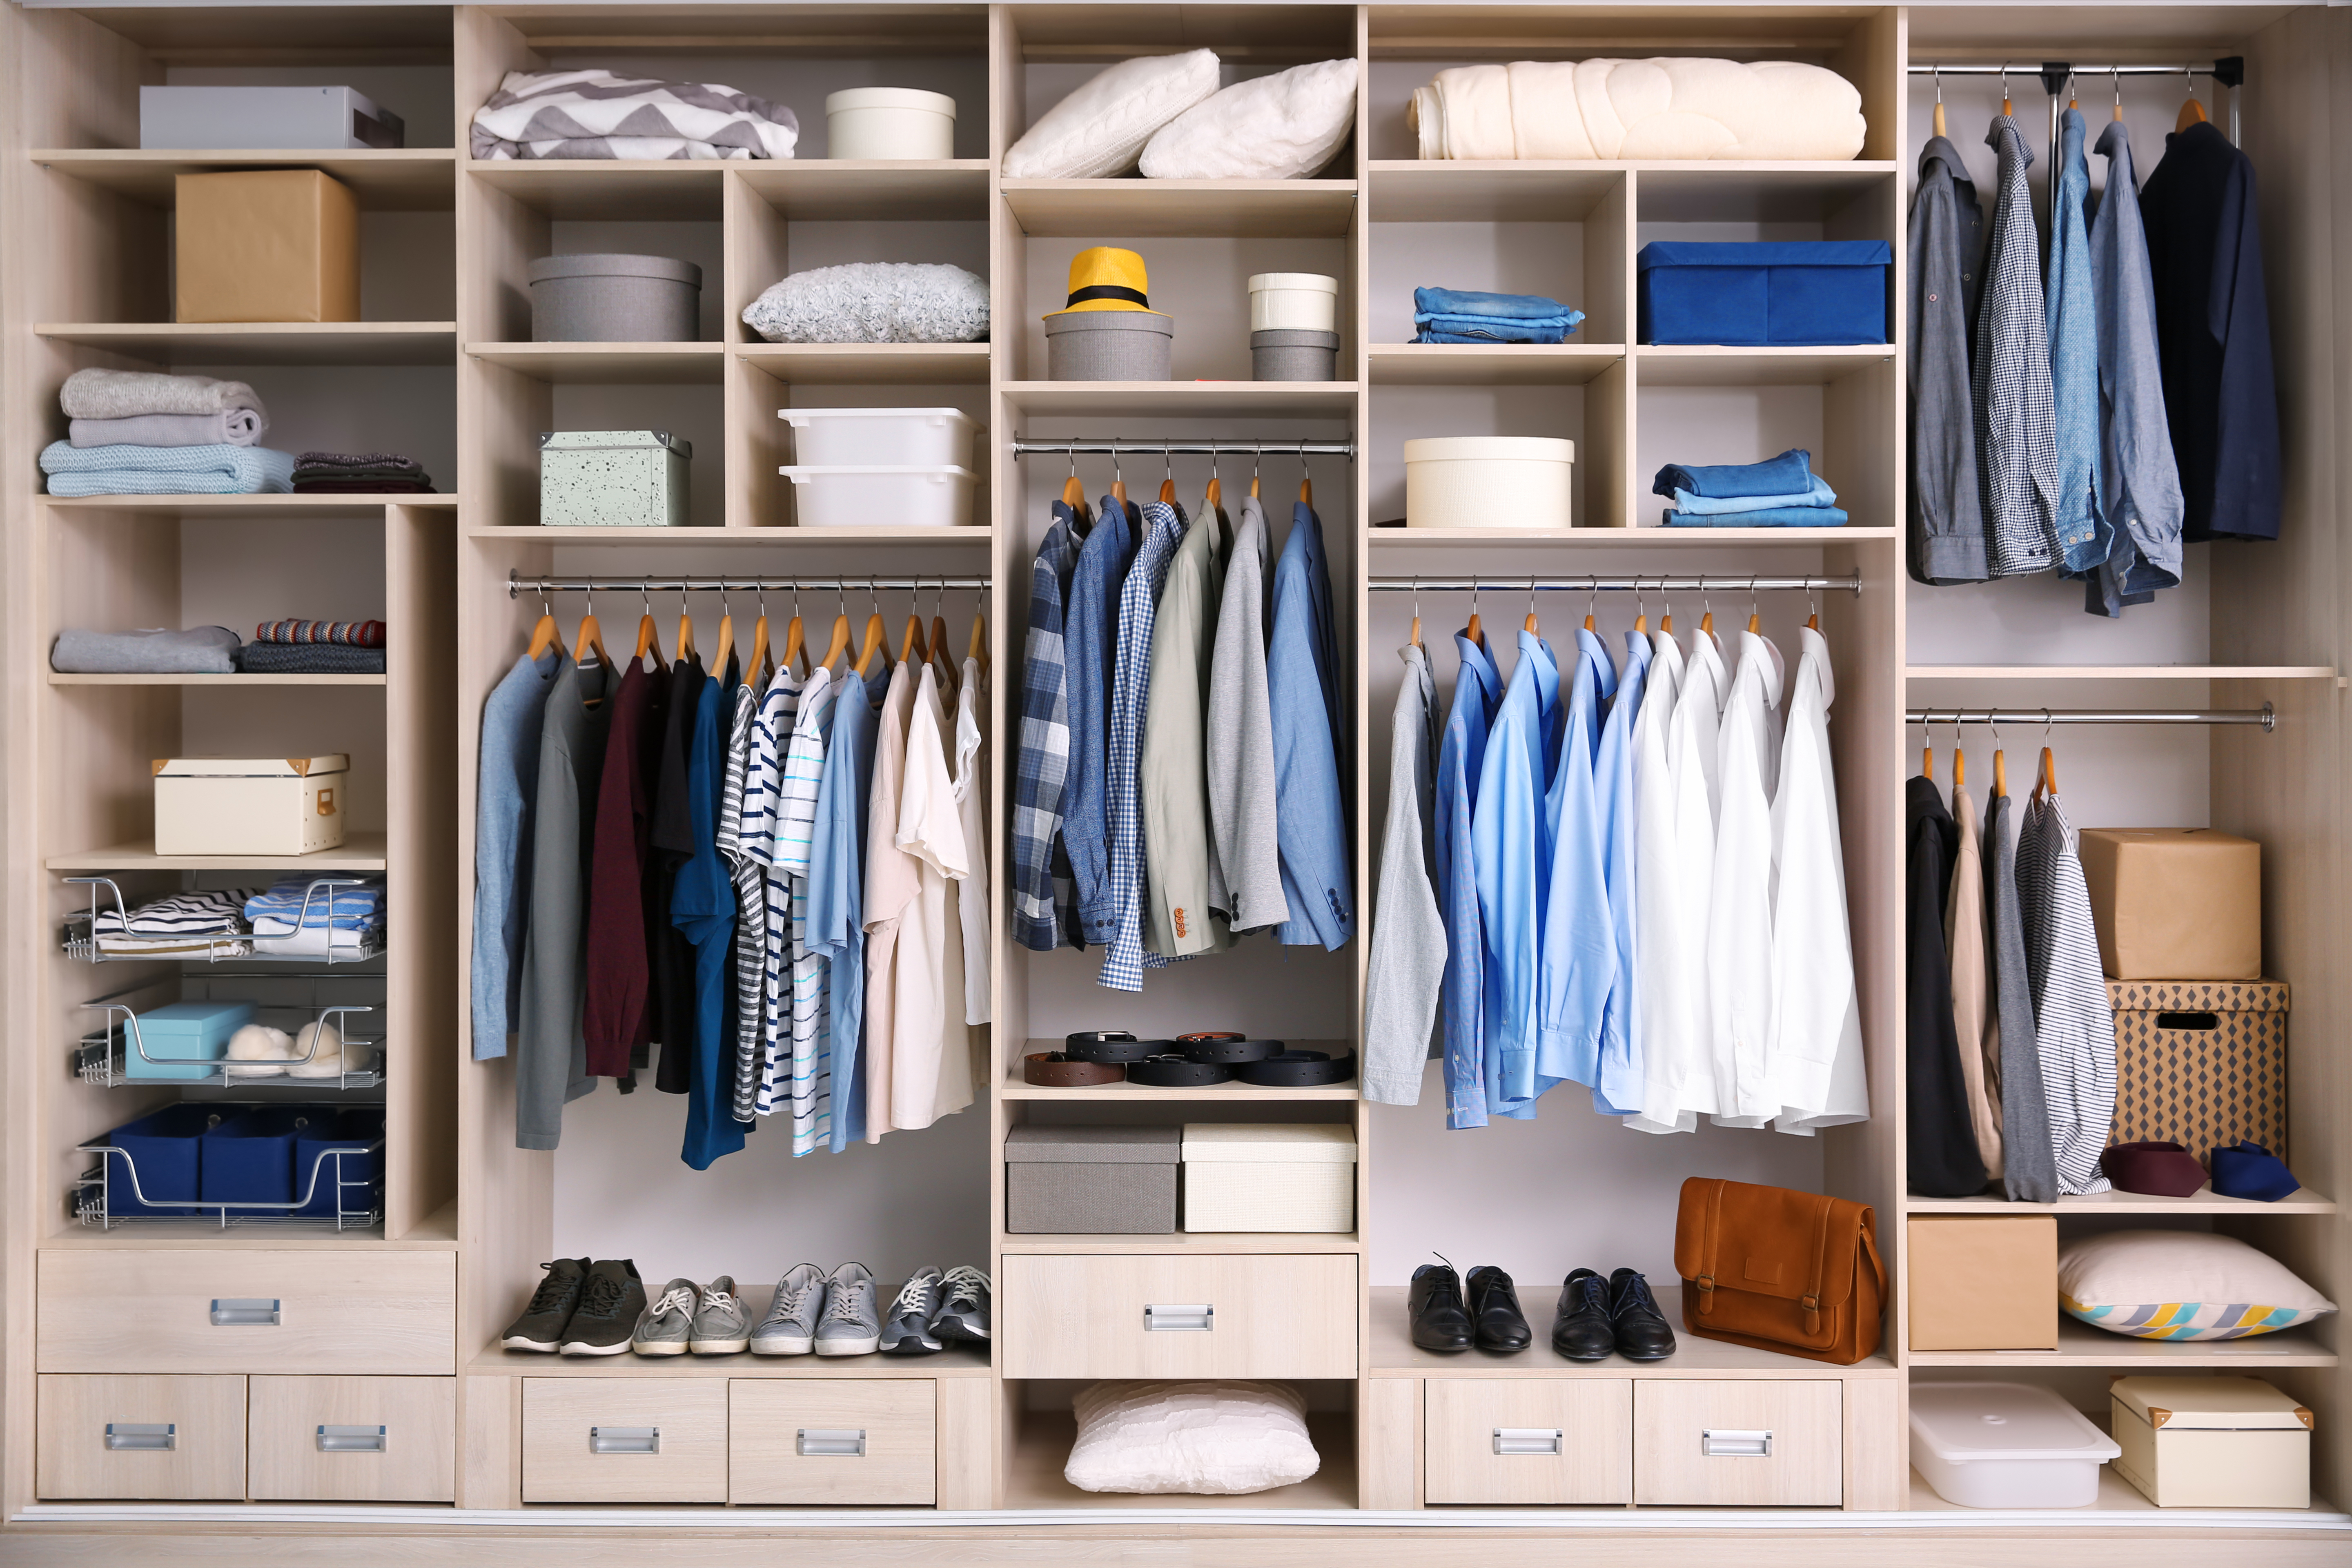 How To Keep Clothes Smelling Fresh In Your Wardrobe & Drawer